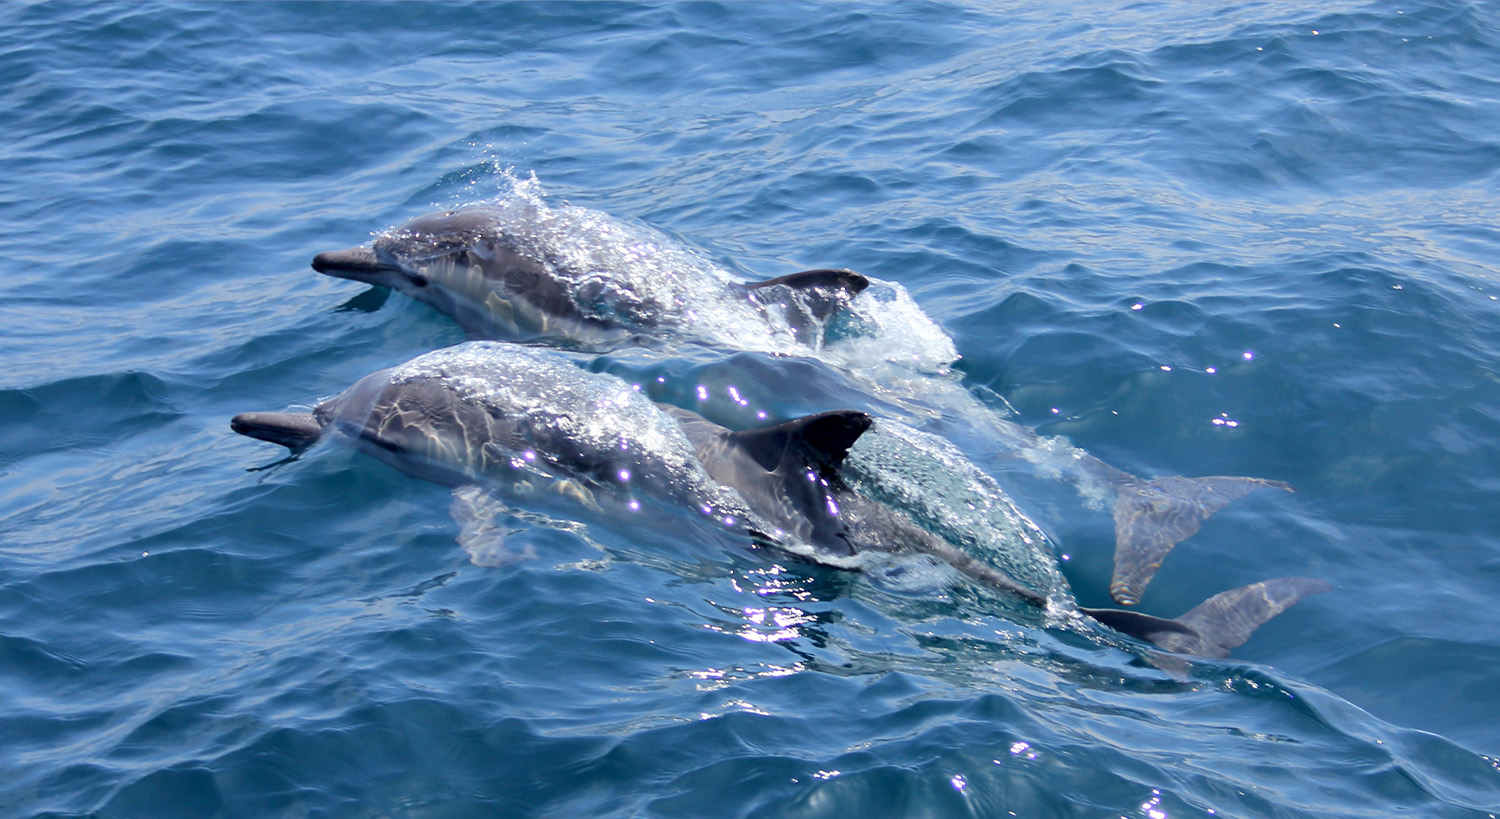 Dolphins in the Adriatic Sea